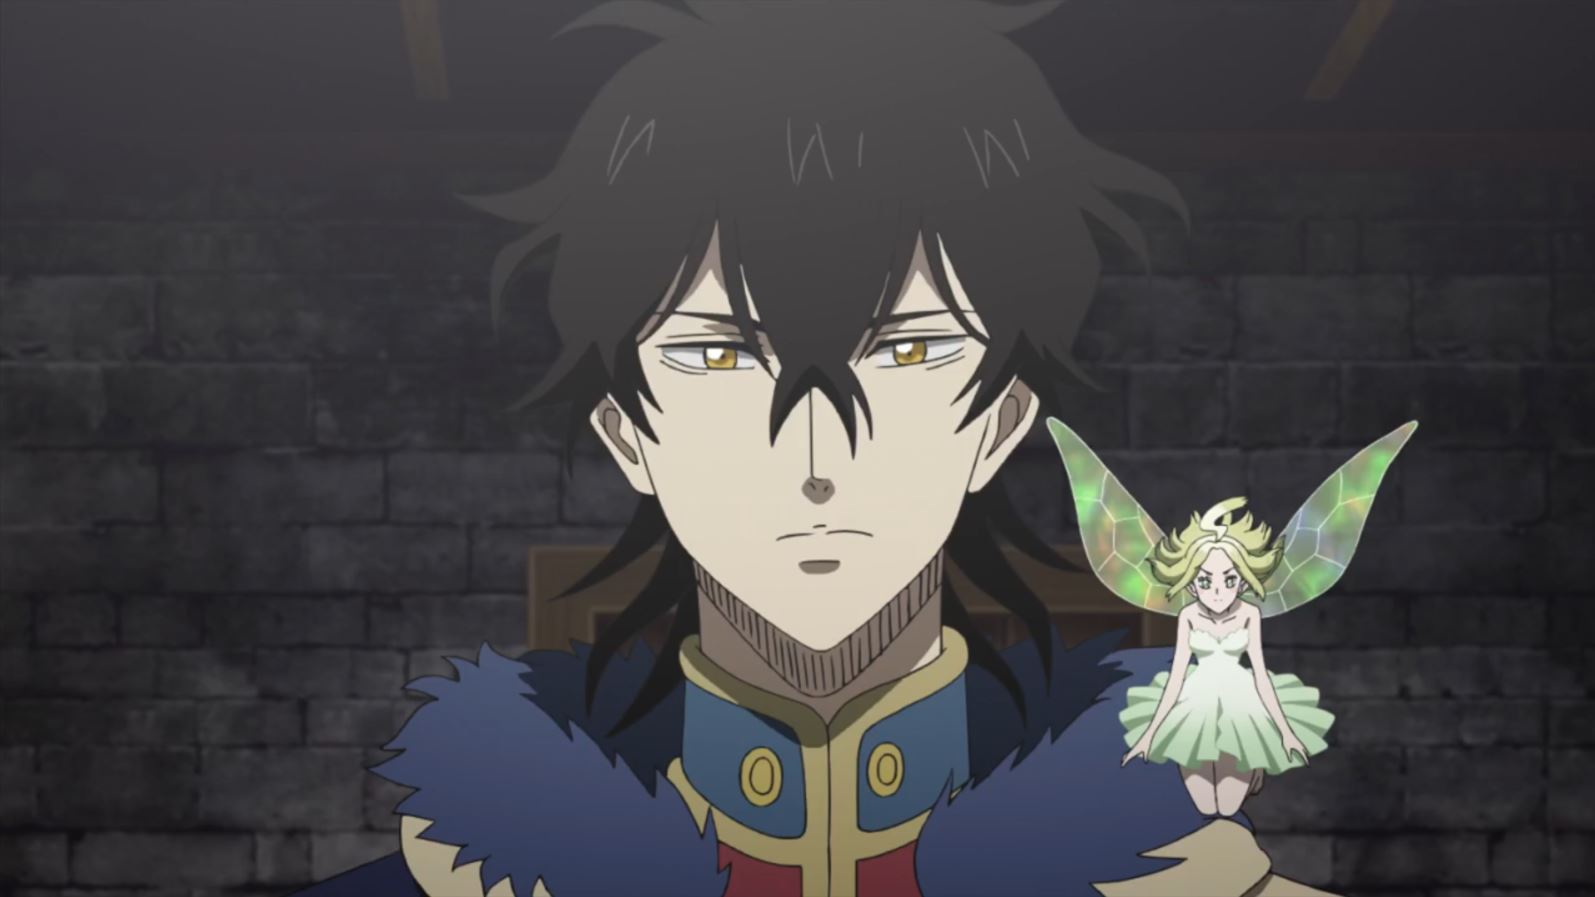 Black Clover Episode 160: Yuno's Past and Lineage